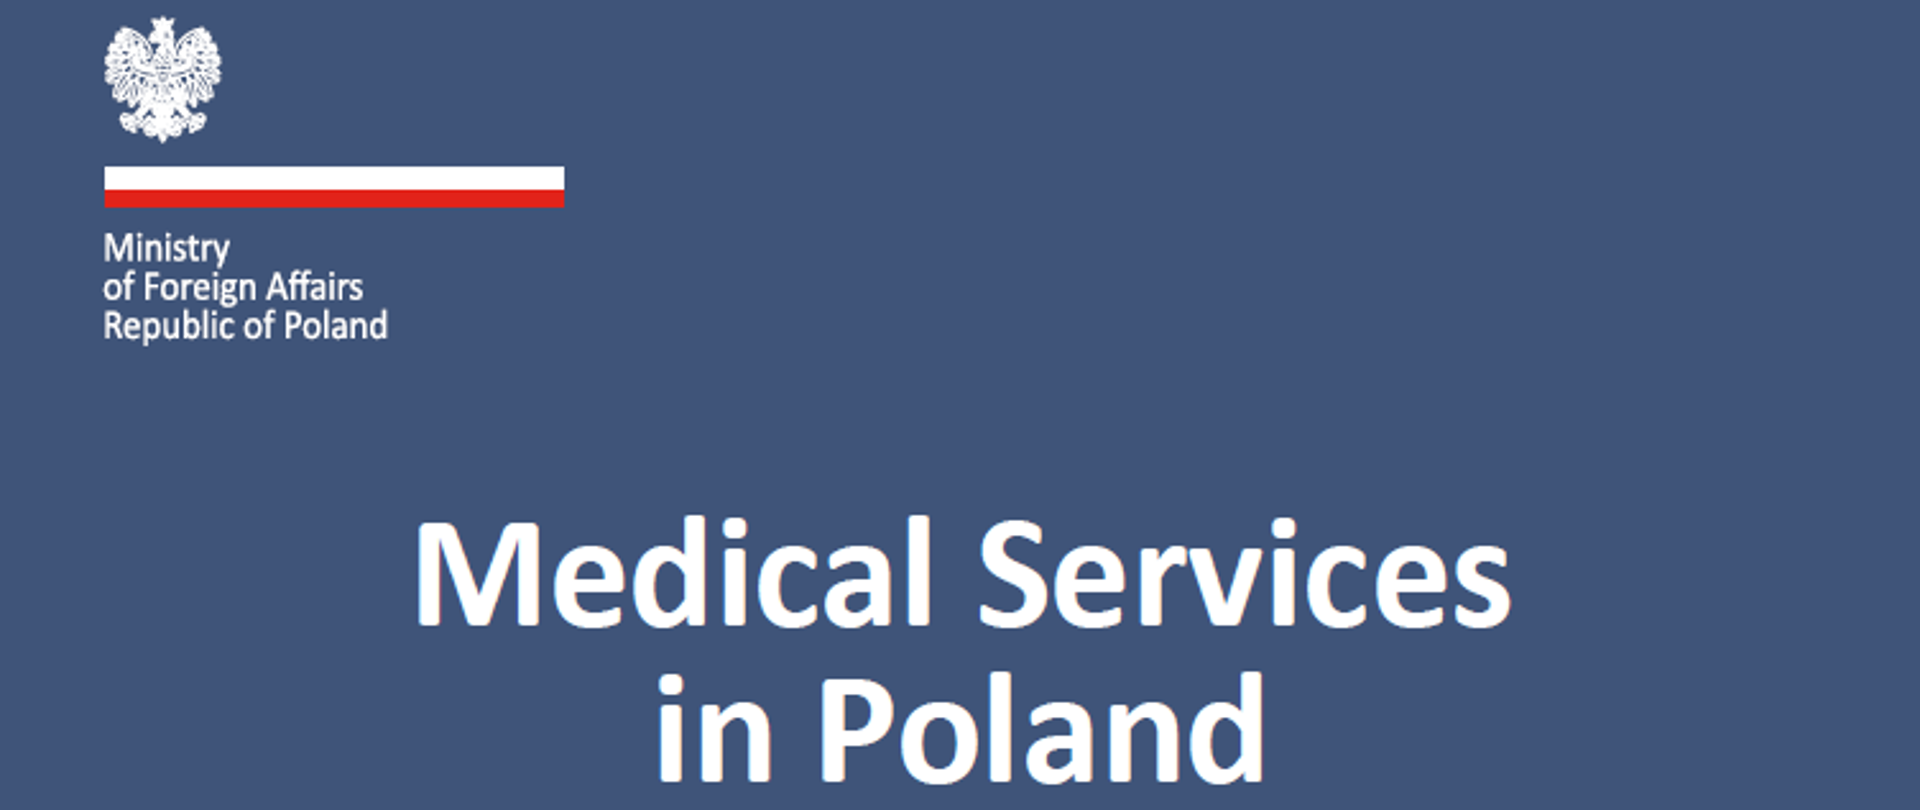 Medical Services in Poland 2020